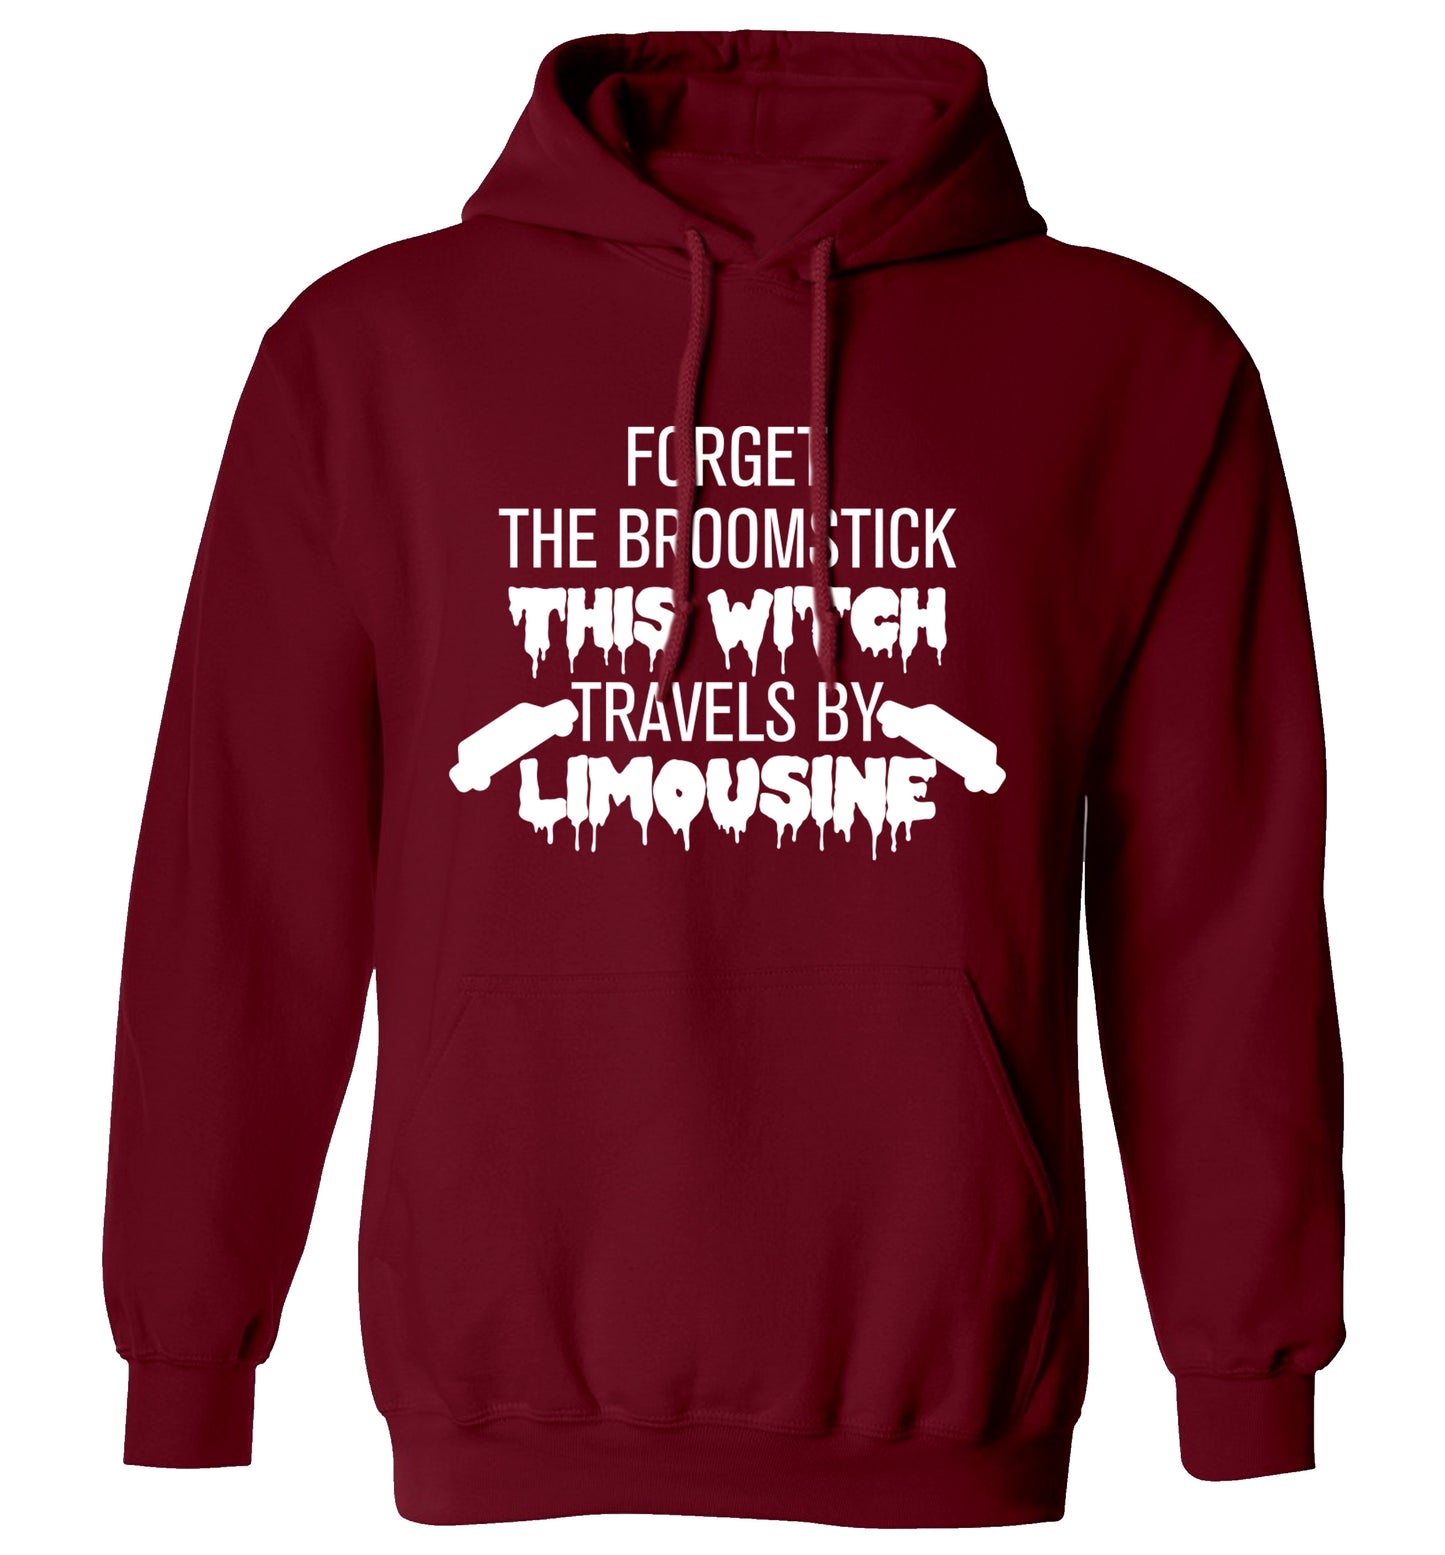 Forget the broomstick this witch travels by limousine adults unisexmaroon hoodie 2XL